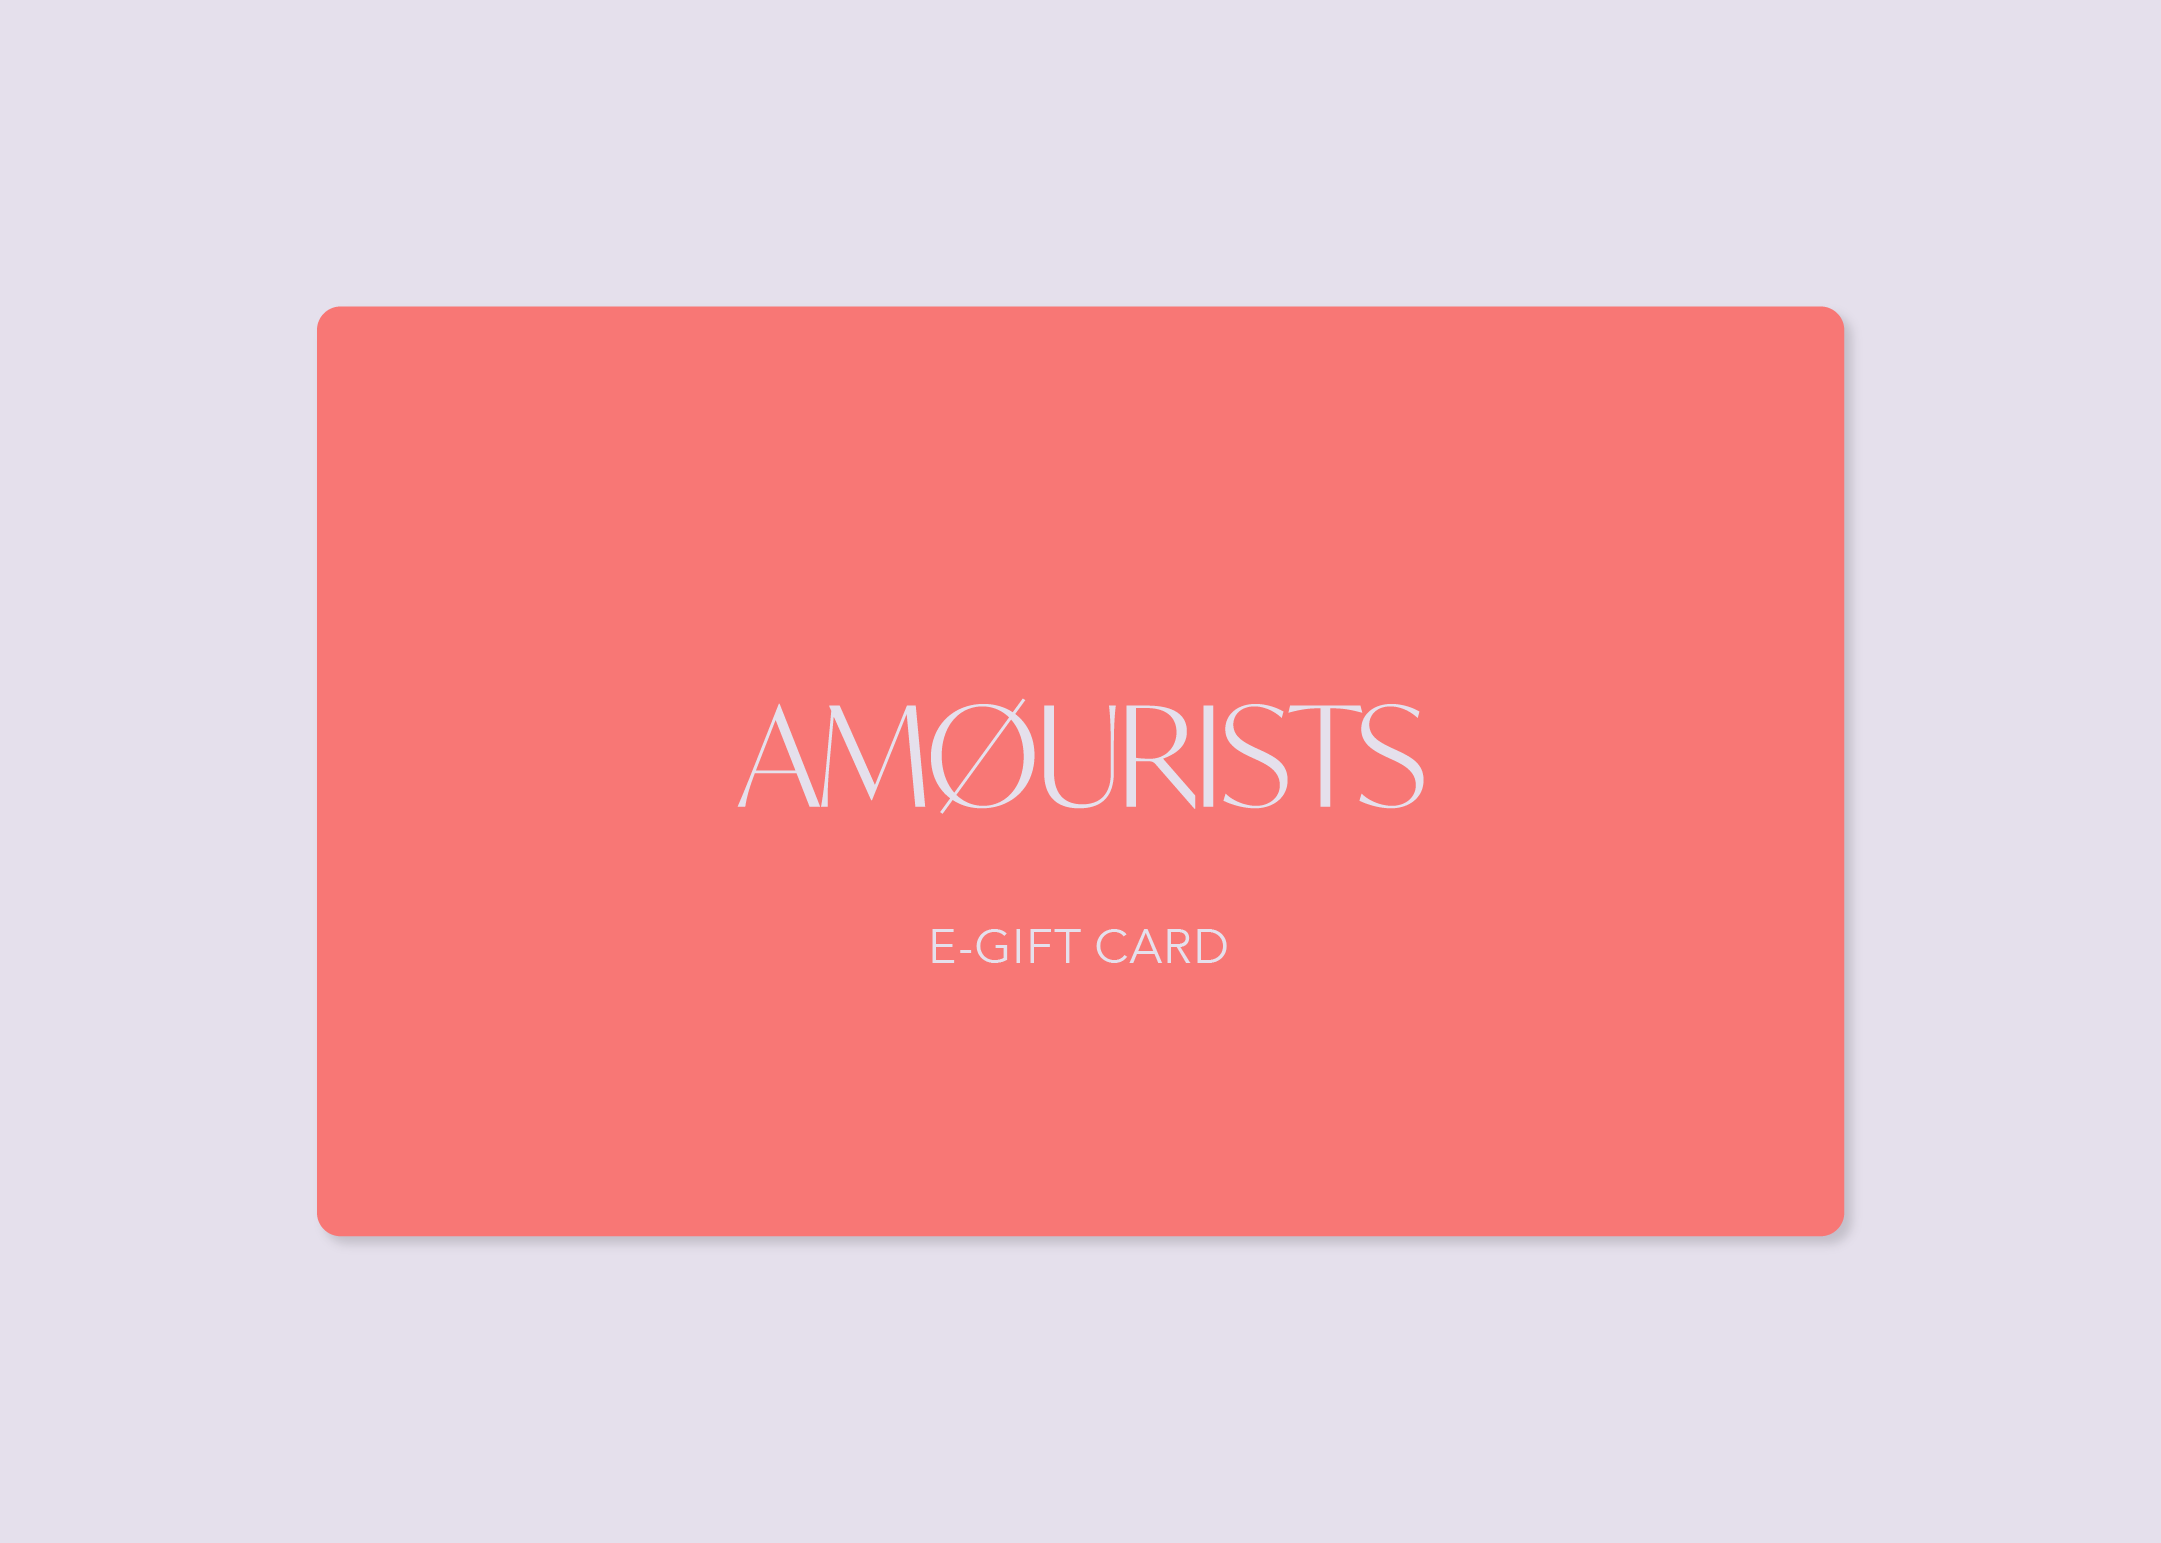 Amourists Jewellery image of E-Gift Cards